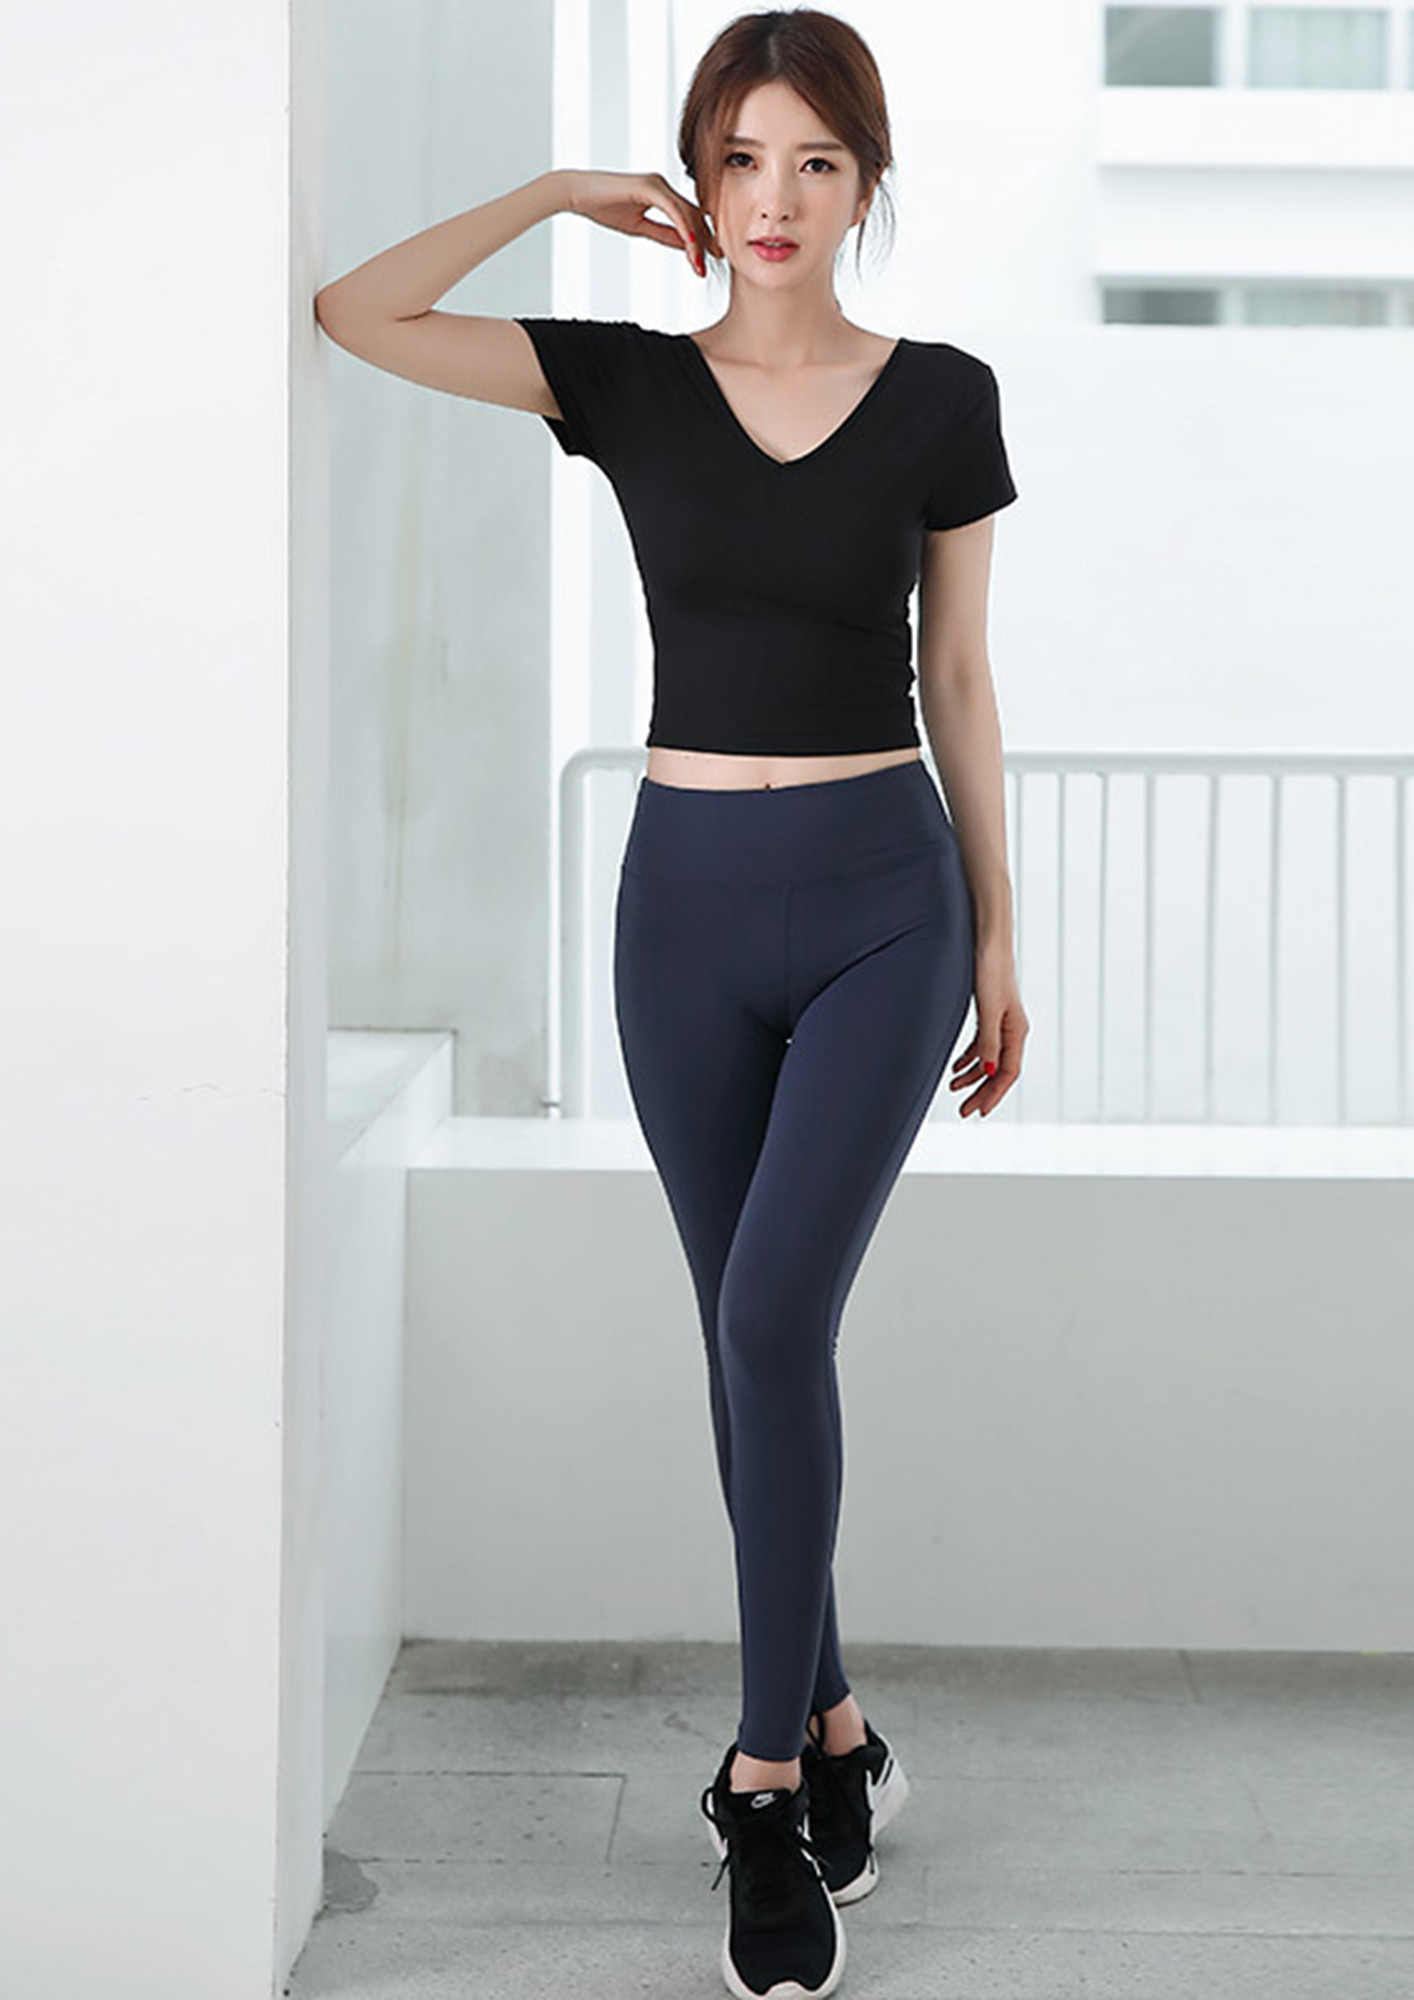 SUPER COMFY BLACK AND BLUE TWO PIECE ACTIVEWEAR